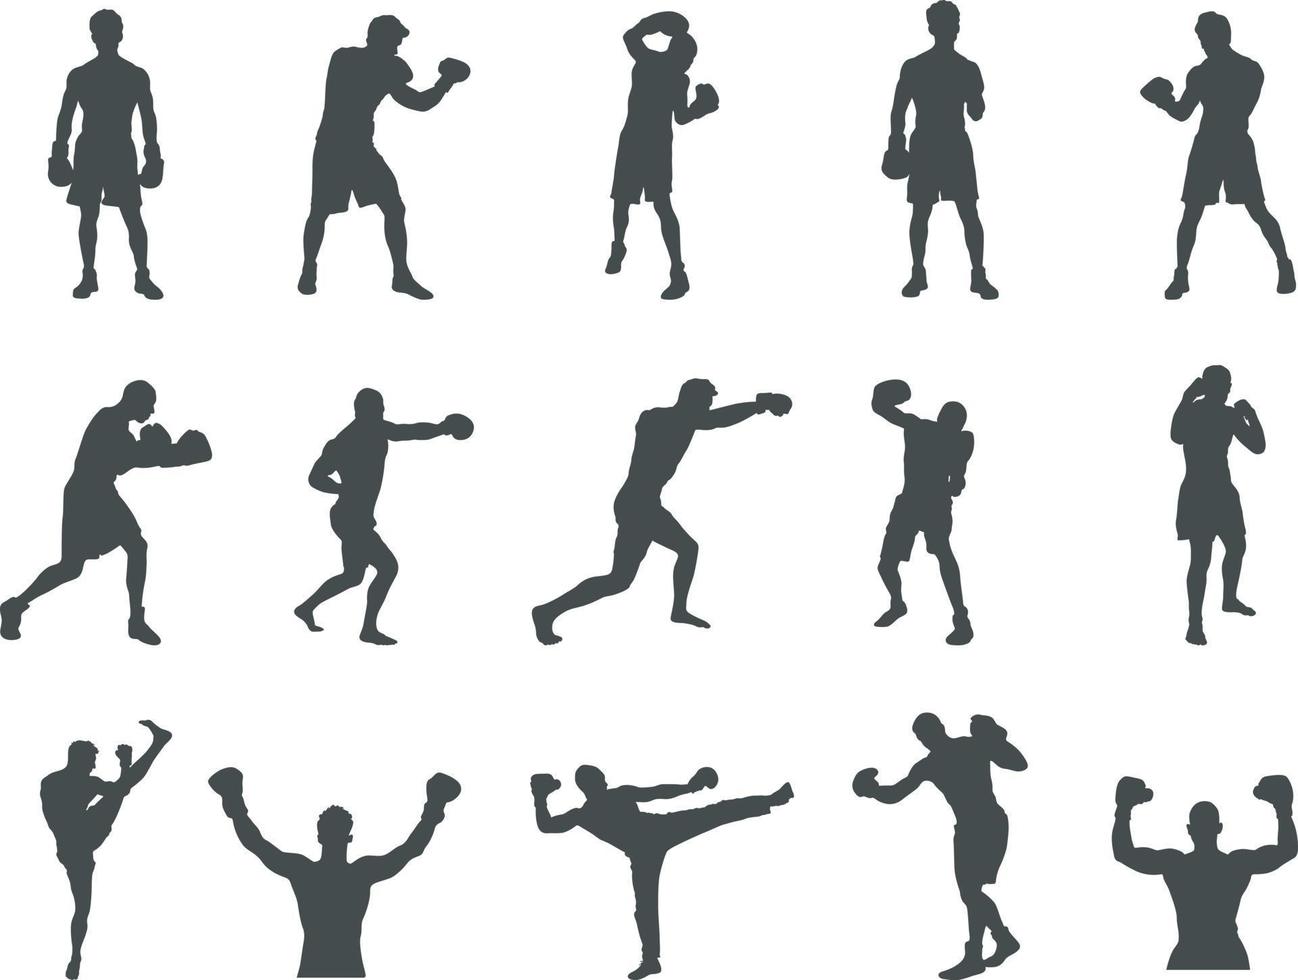 Boxing silhouettes, Boxing silhouette set, Boxers silhouettes, Boxing SVG, Boxing vector -V02